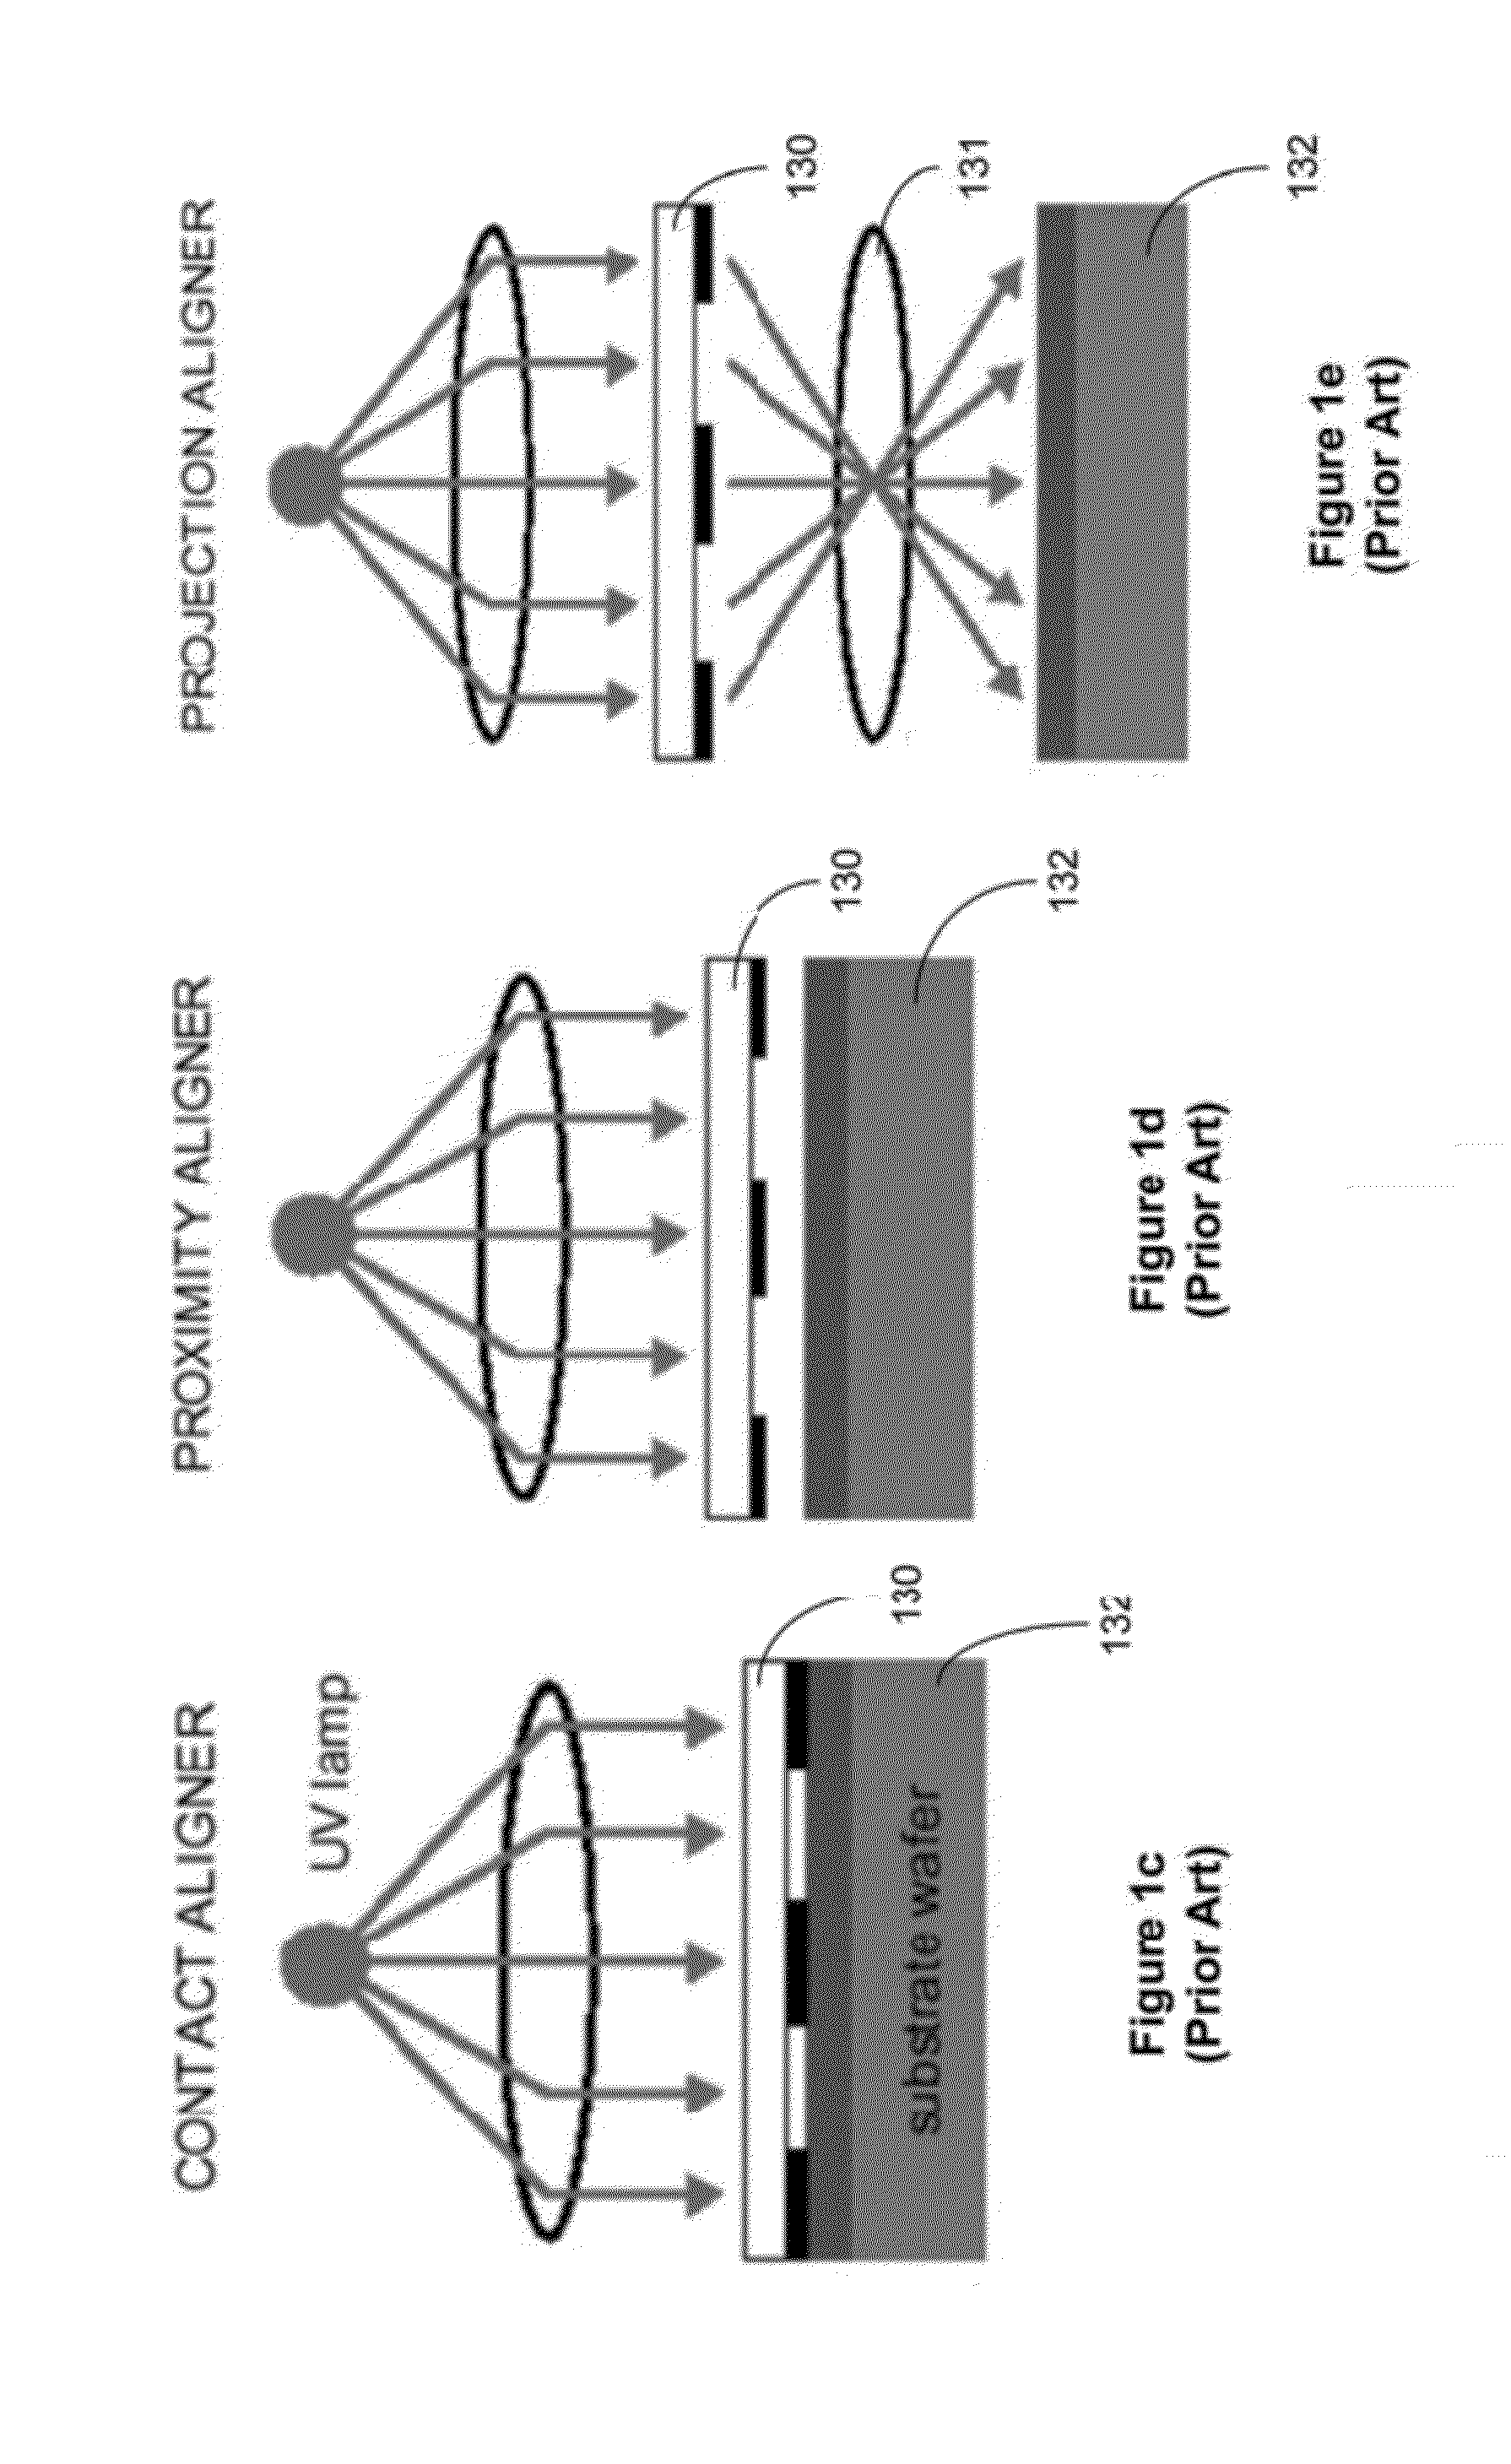 System and Method for Manufacturing Three Dimensional Integrated Circuits